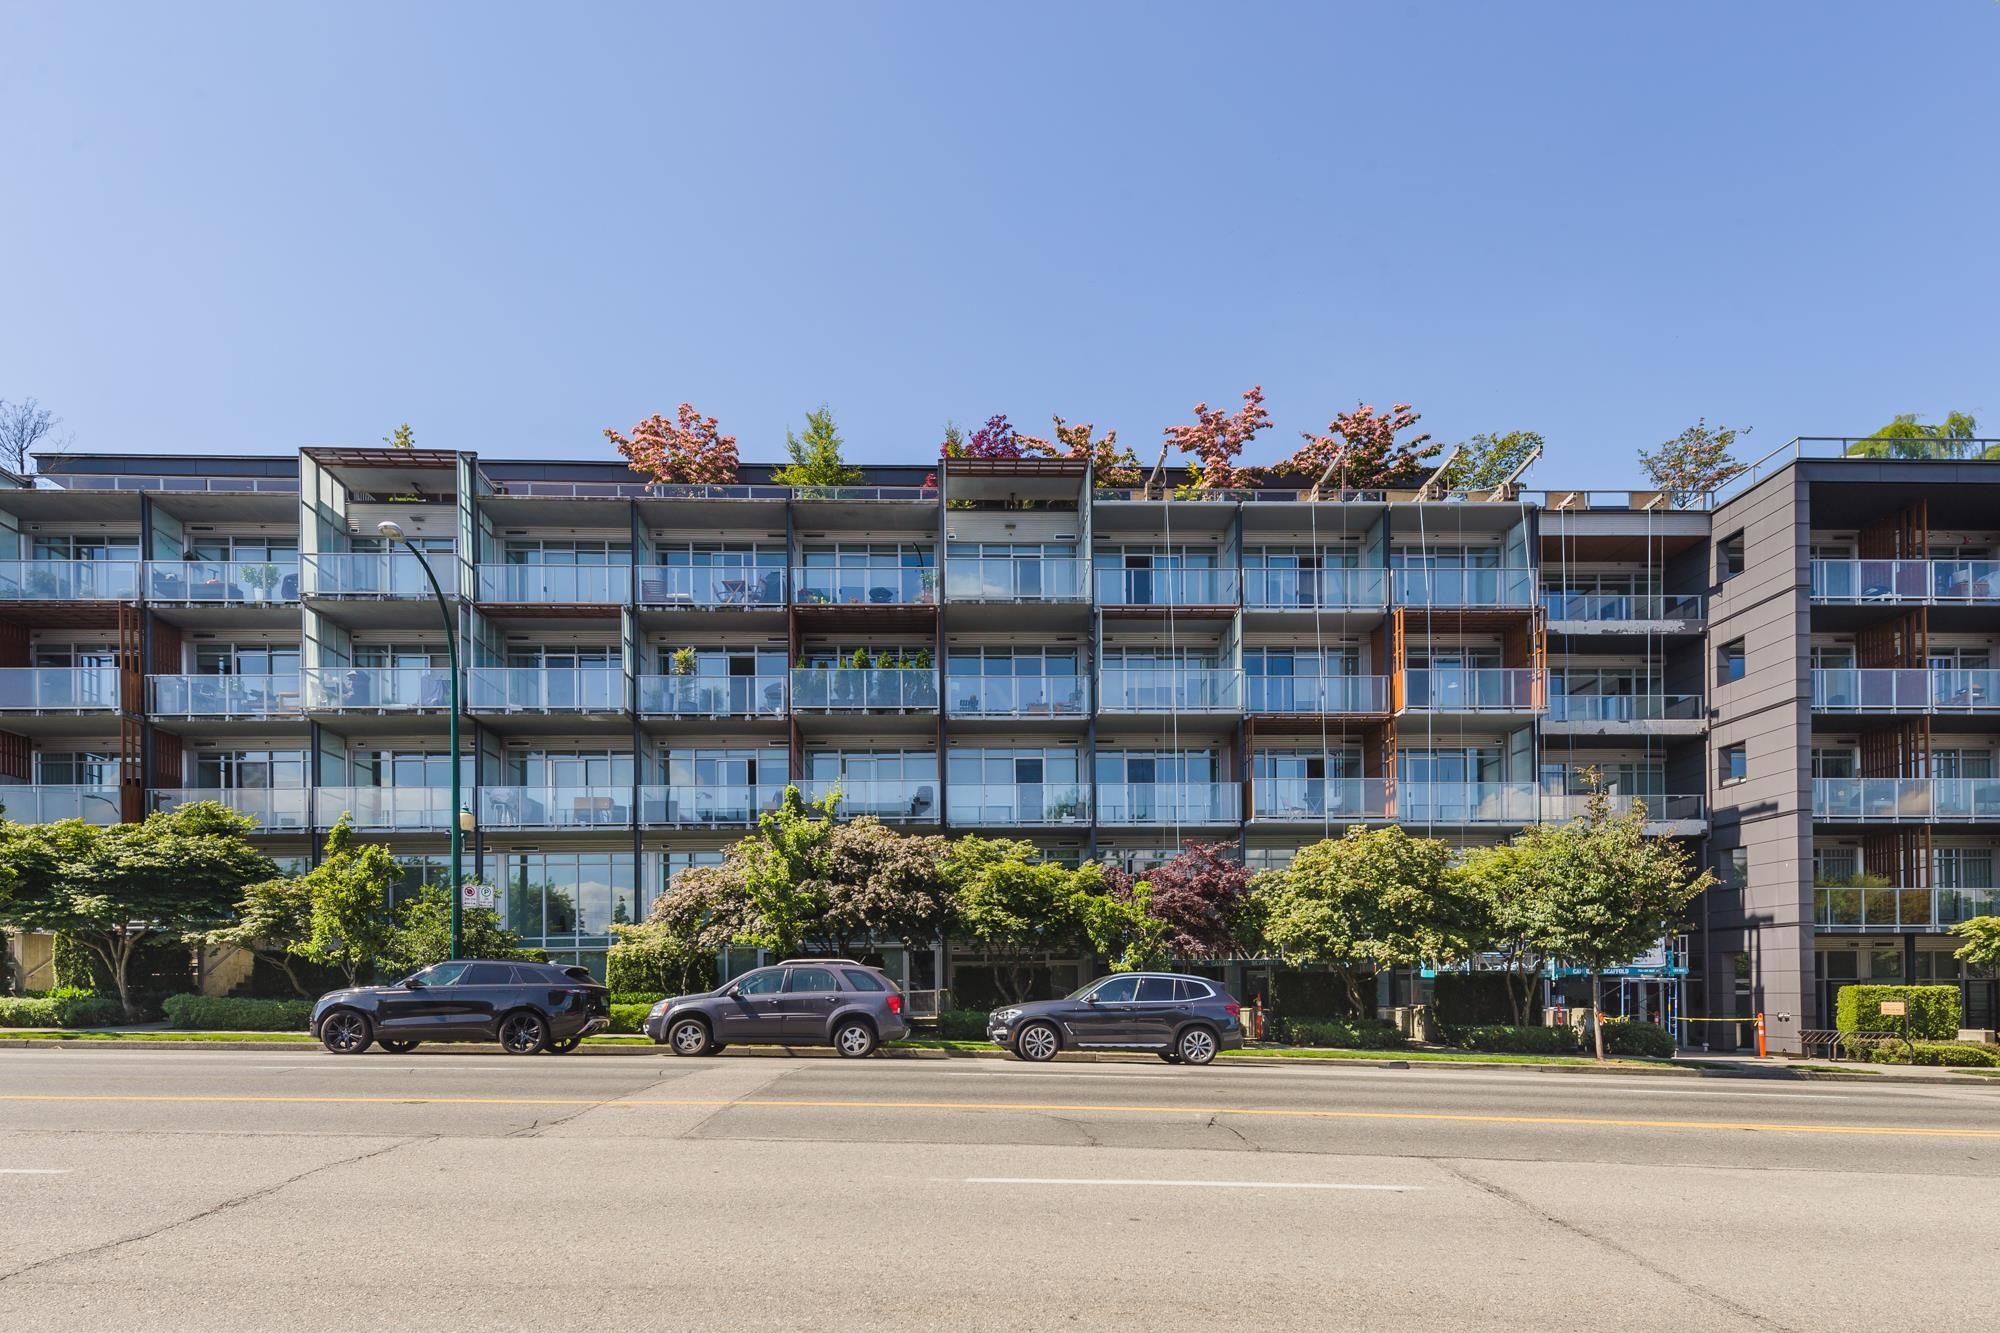 Congratulations to my sellers on the sale of their 1 bedroom suite at The Jacobsen building in Mount Pleasant and also to the new buyers who already live in the building!